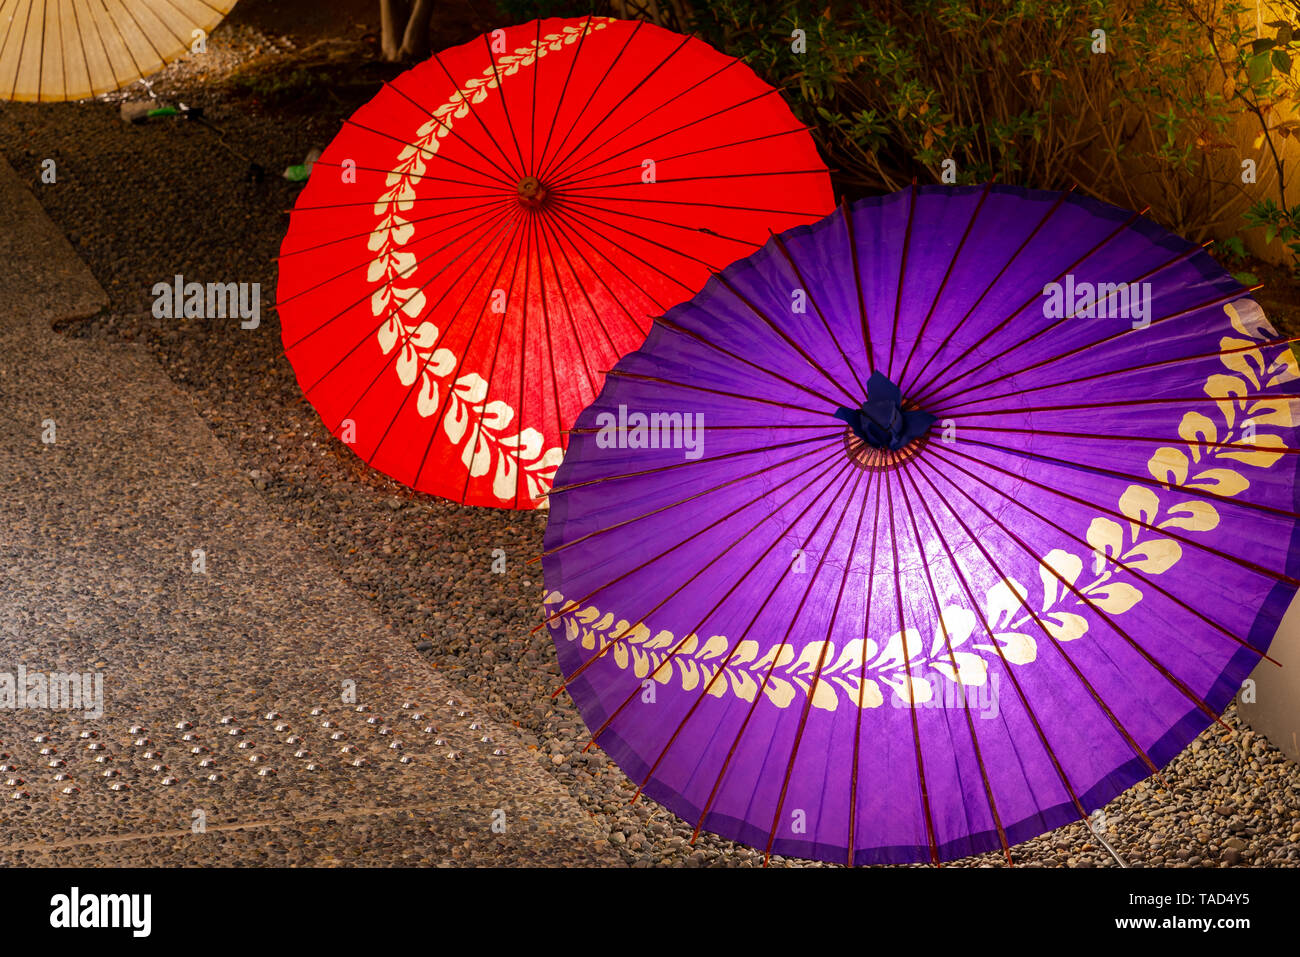 Japanese umbrella in Kyoto, Japan. Image of Japanese culture. Stock Photo